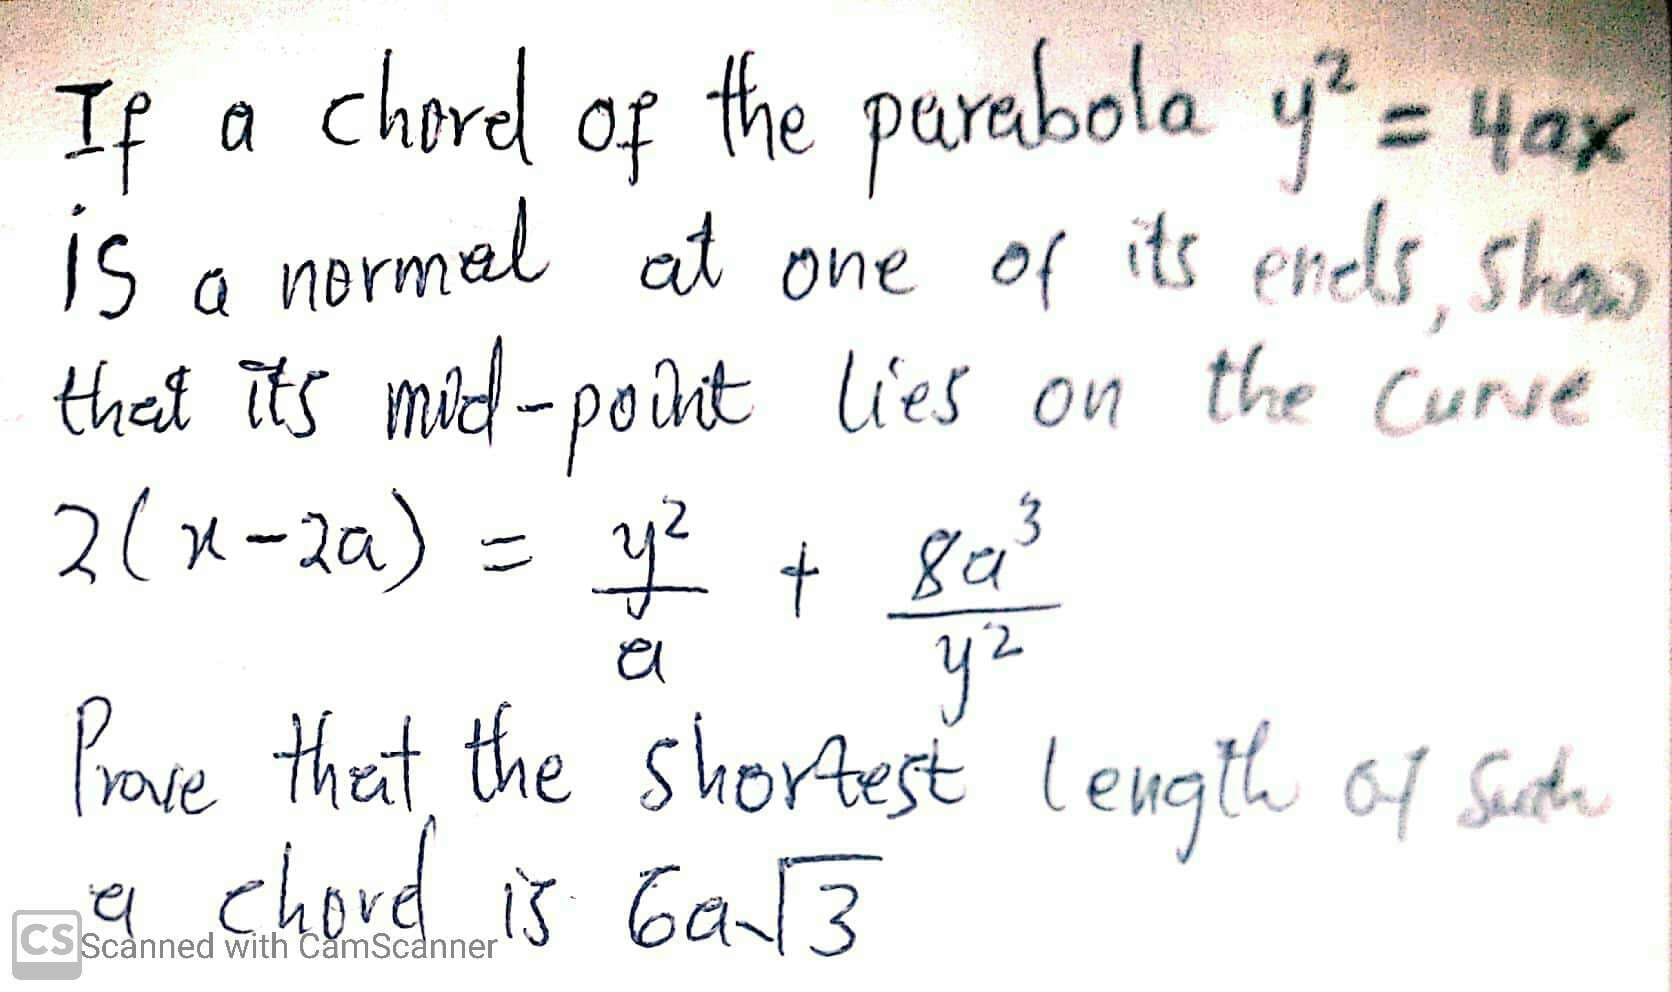 If a chorel of the
is o normel at one of its ends, shaw
that its mid-point lies on the Curse
2(x-2a) = y + Ba
parabola y= 4ax
y2
Bave theat, the shortest Length of Suth
a chord is Ga3
CSScanned with CamScanner
